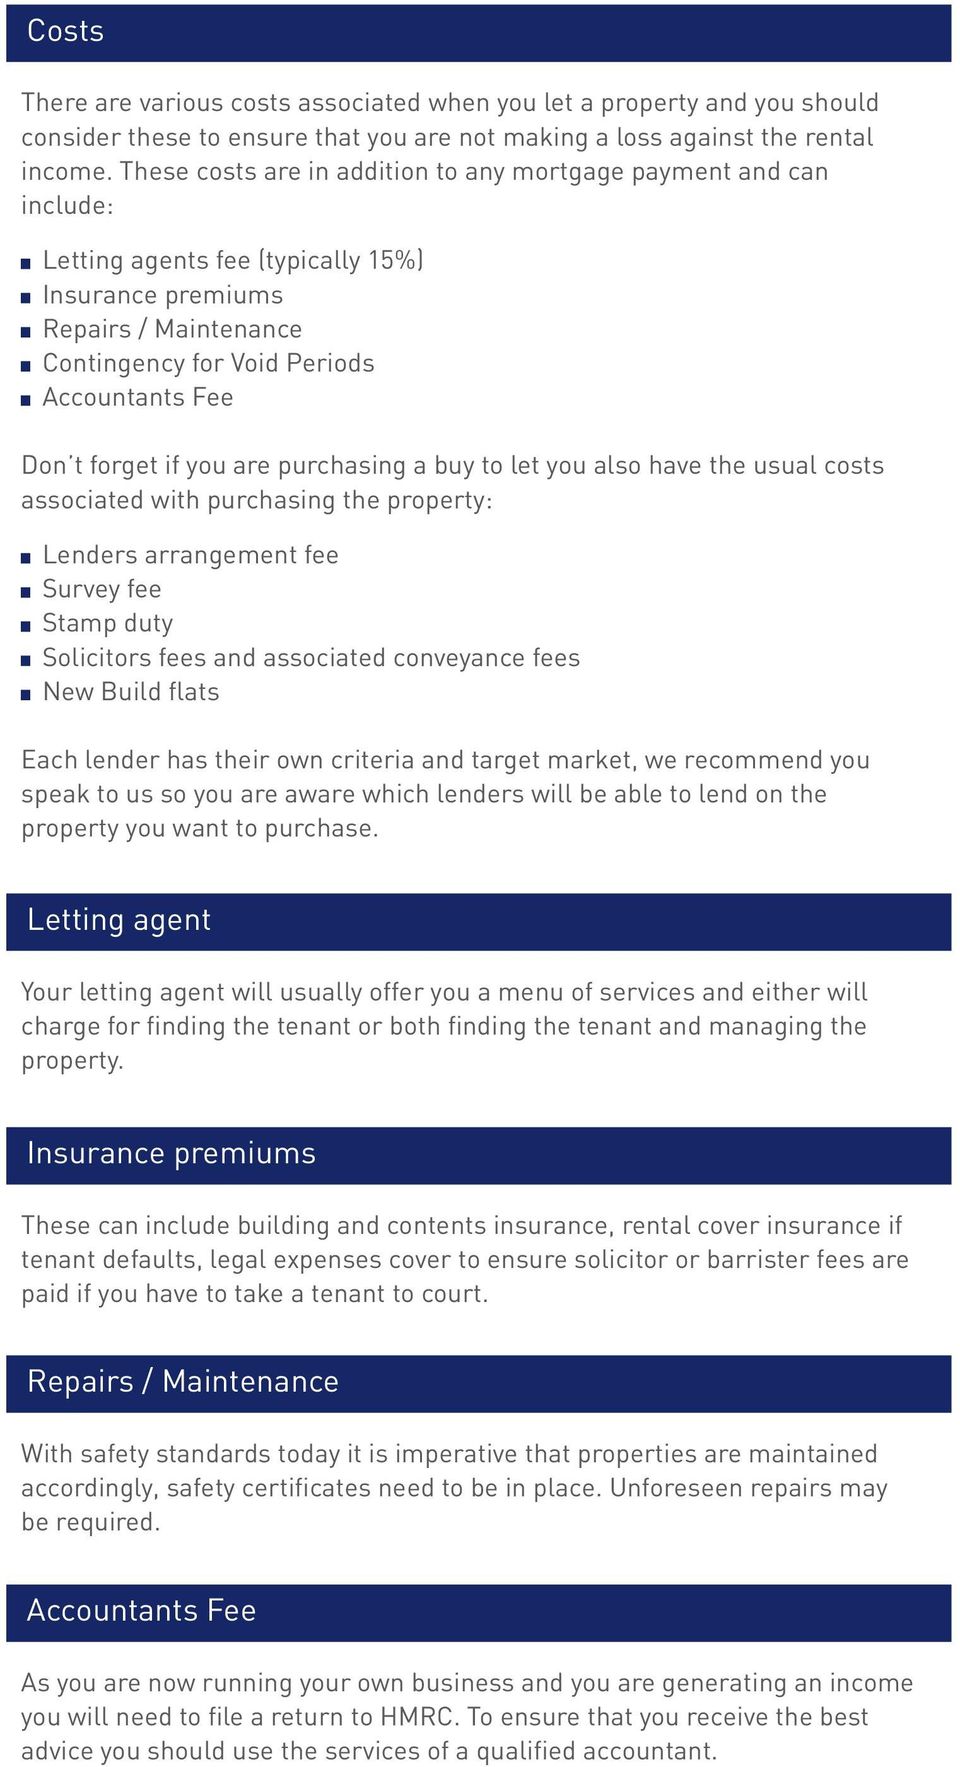 forget if you are purchasing a buy to let you also have the usual costs associated with purchasing the property: Lenders arrangement fee Survey fee Stamp duty Solicitors fees and associated